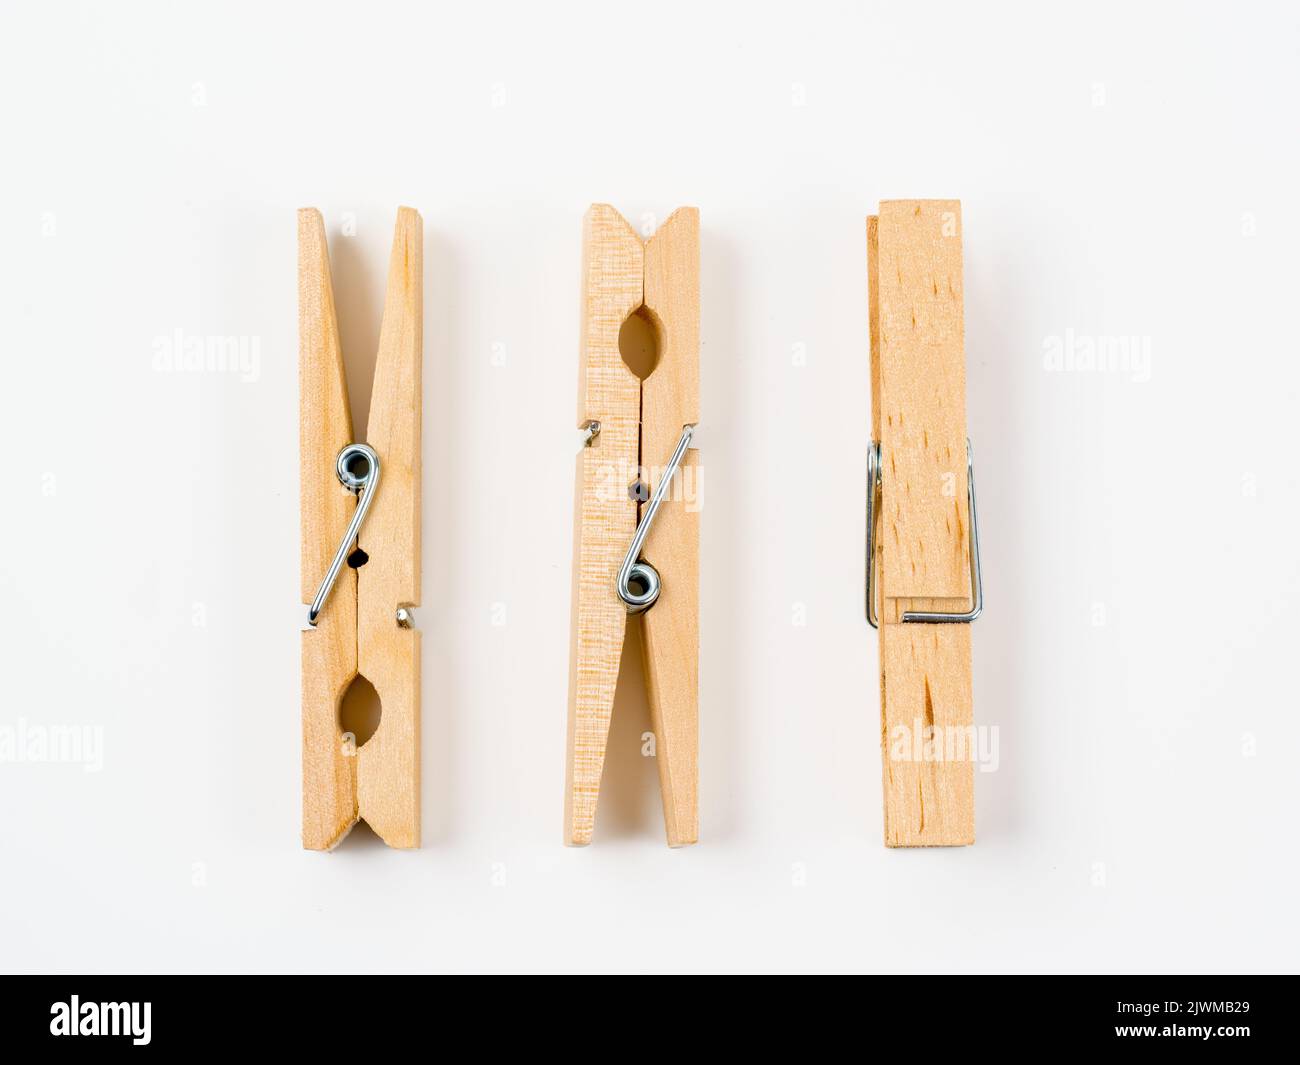 wooden spftwood pegs isolated on a white background Stock Photo